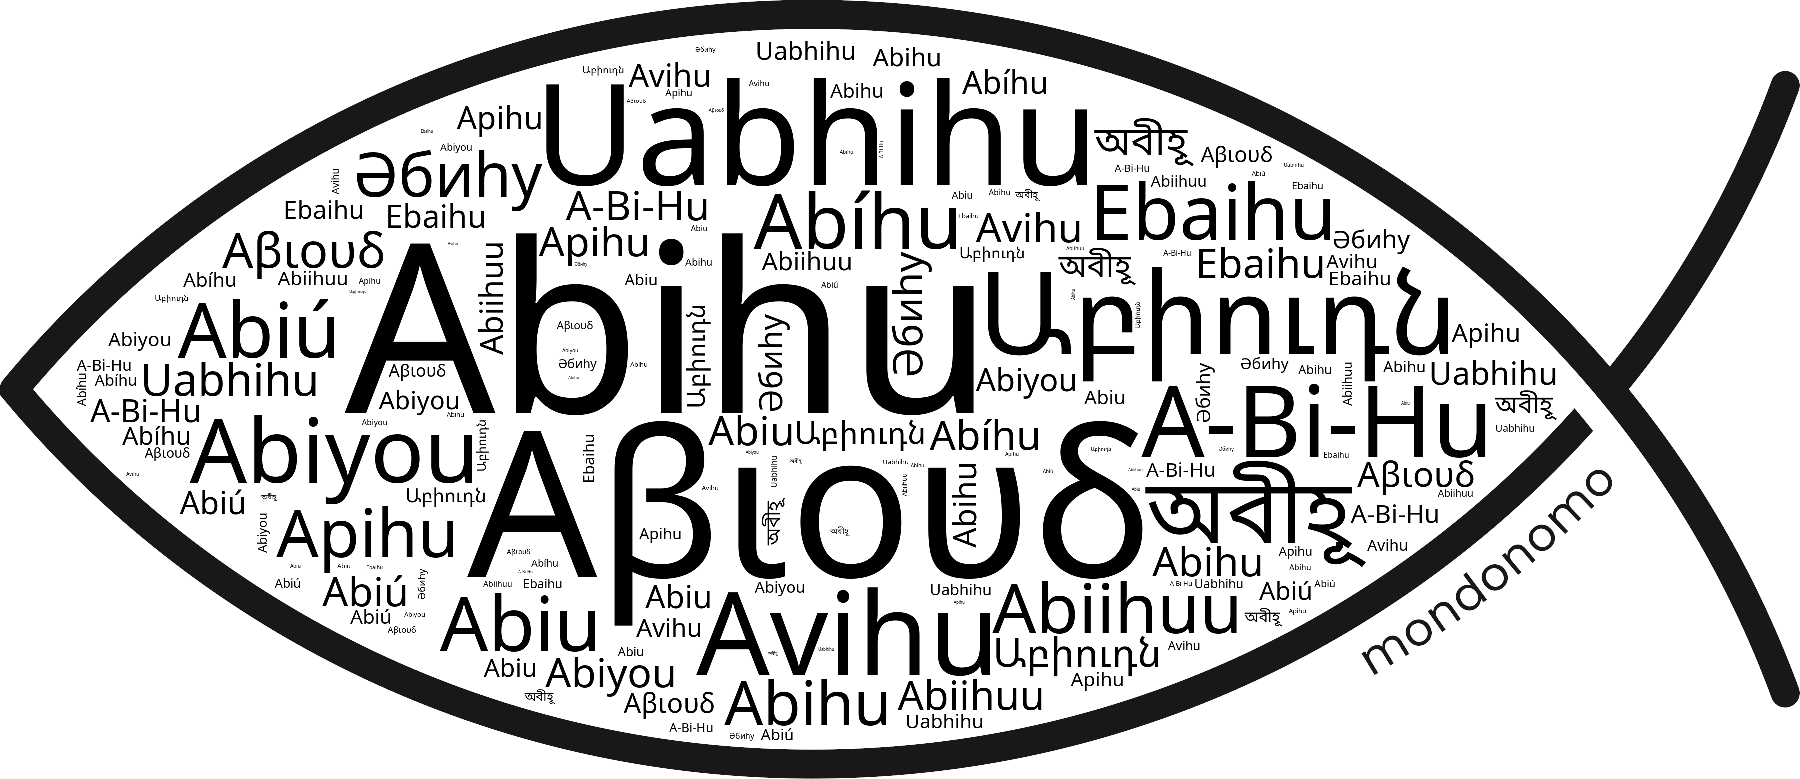 Name Abihu in the world's Bibles